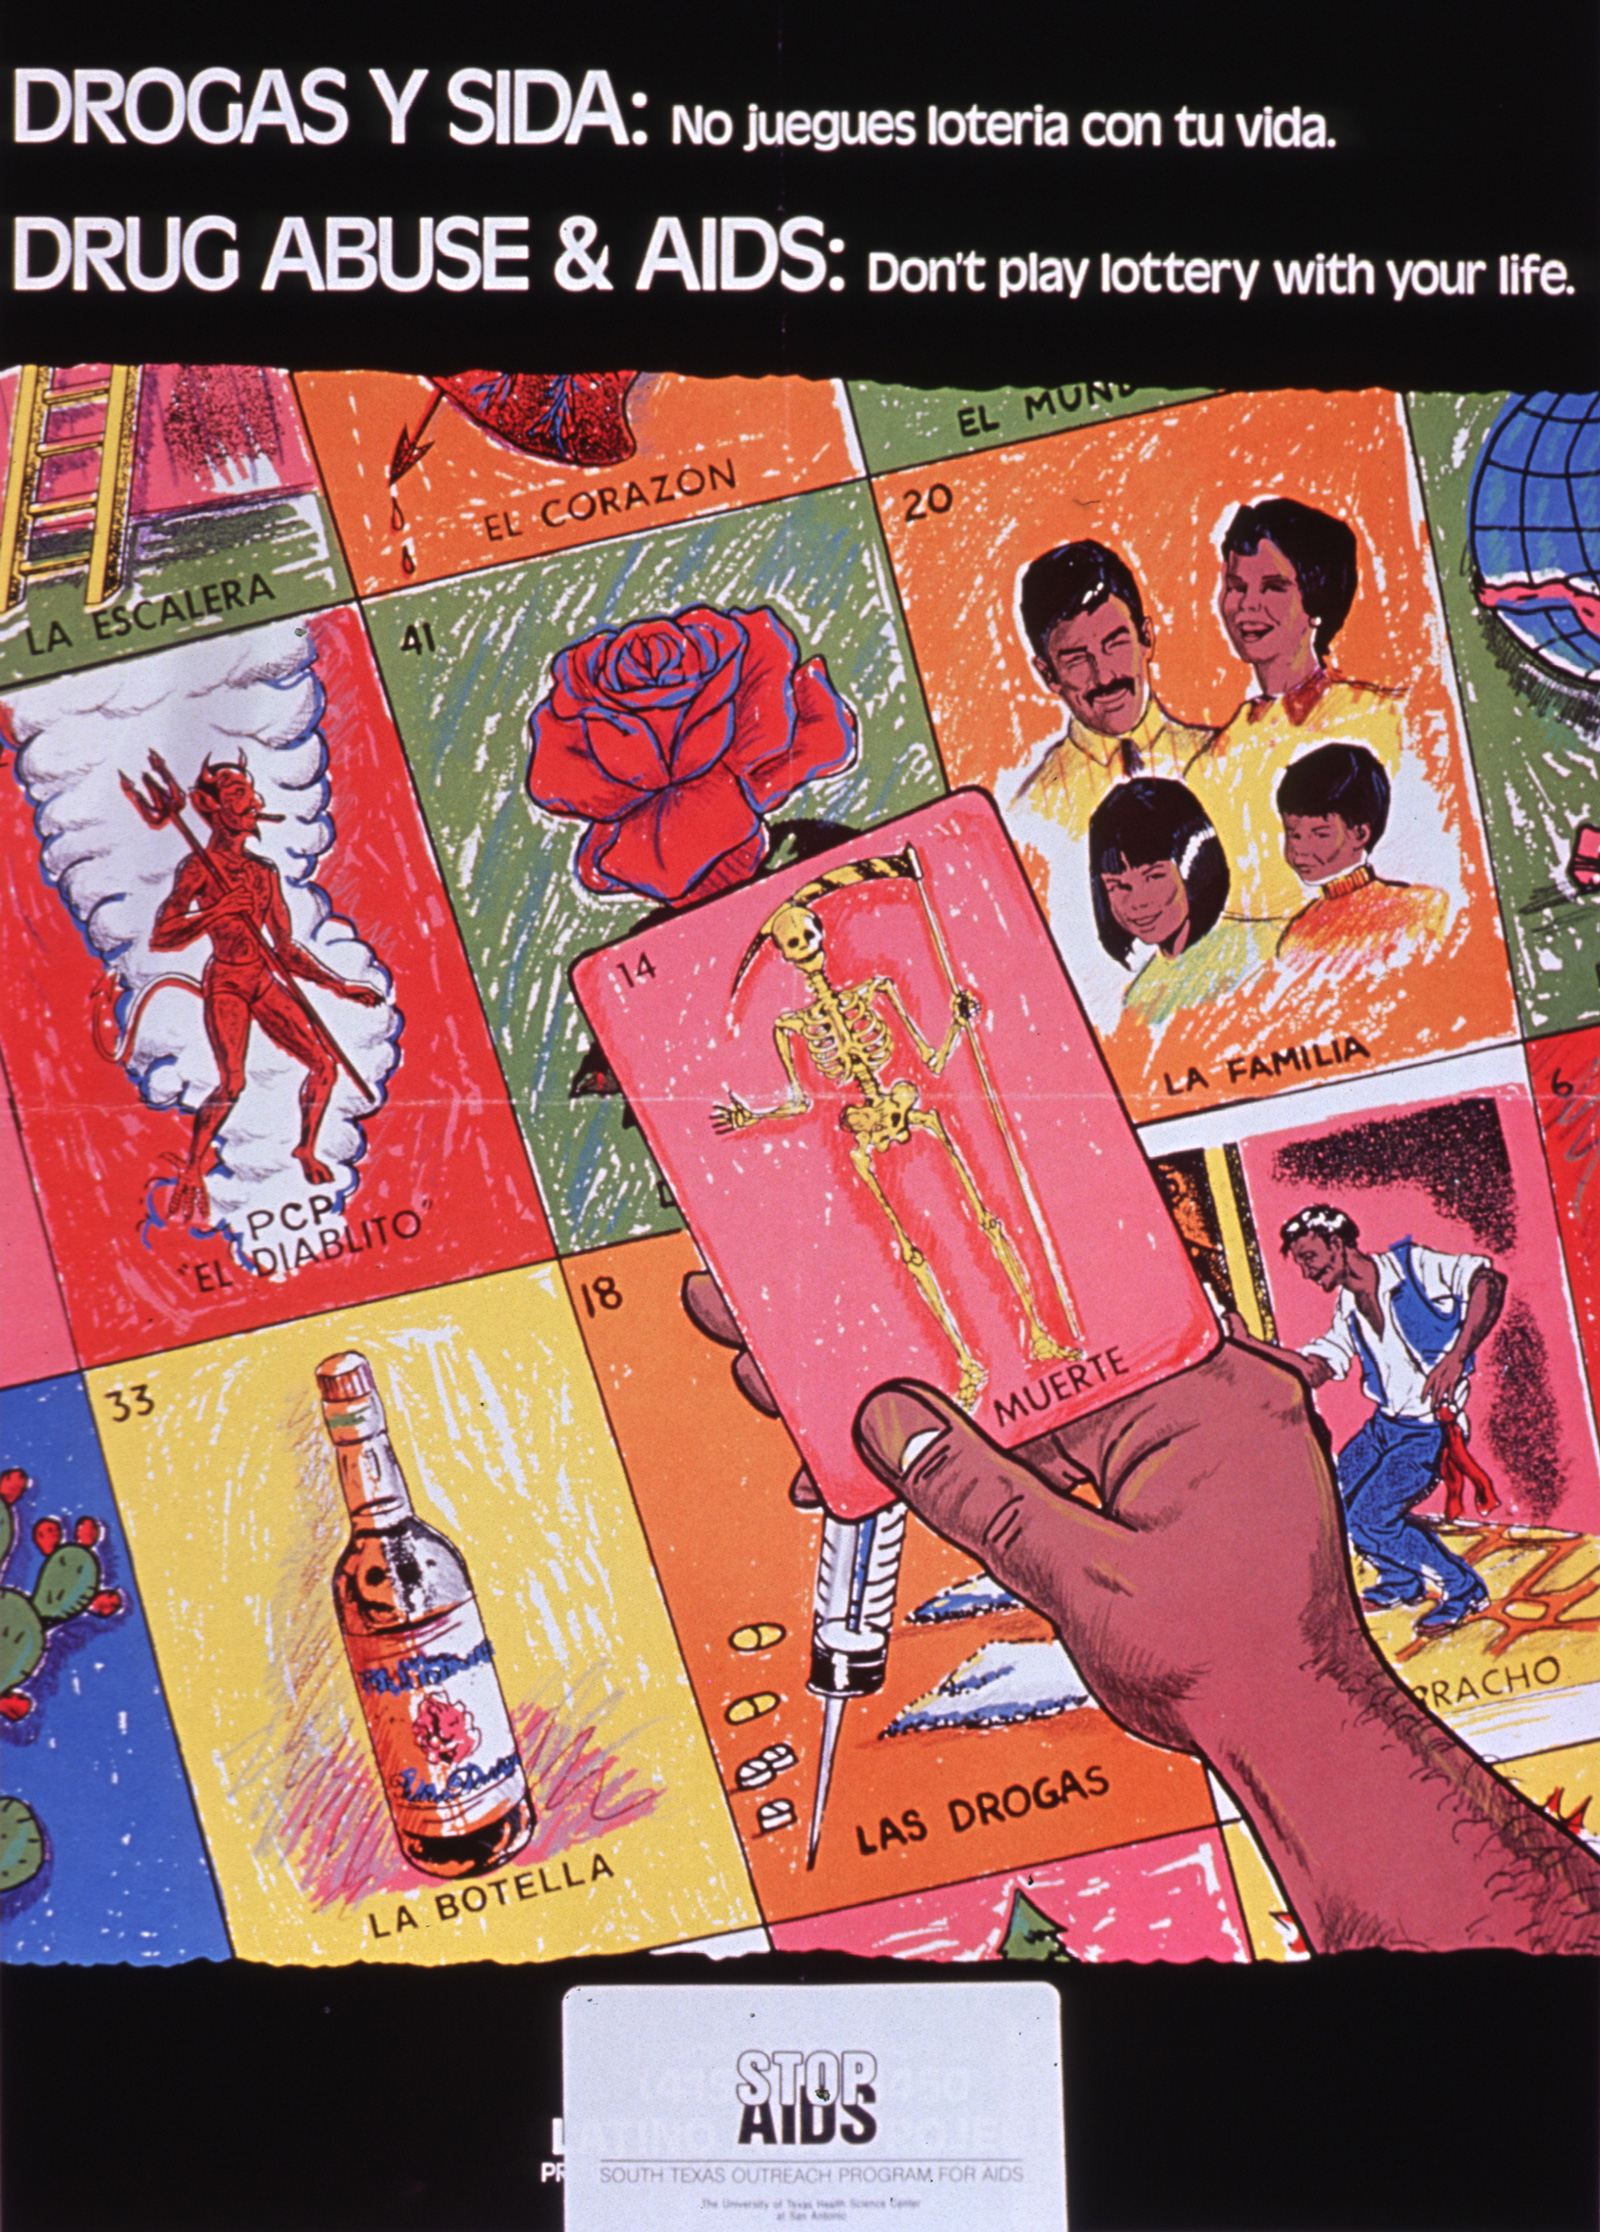 Drawing of a hand holding up a card with a skeleton and the word “muerte”; behind are more cards with symbolic images such as a rose, a family, a bottle, the devil; and above is the title “Drogas y Sida: no juegues loteria con tu vida /Drug Abuse and AIDS: don’t play lottery with your life”